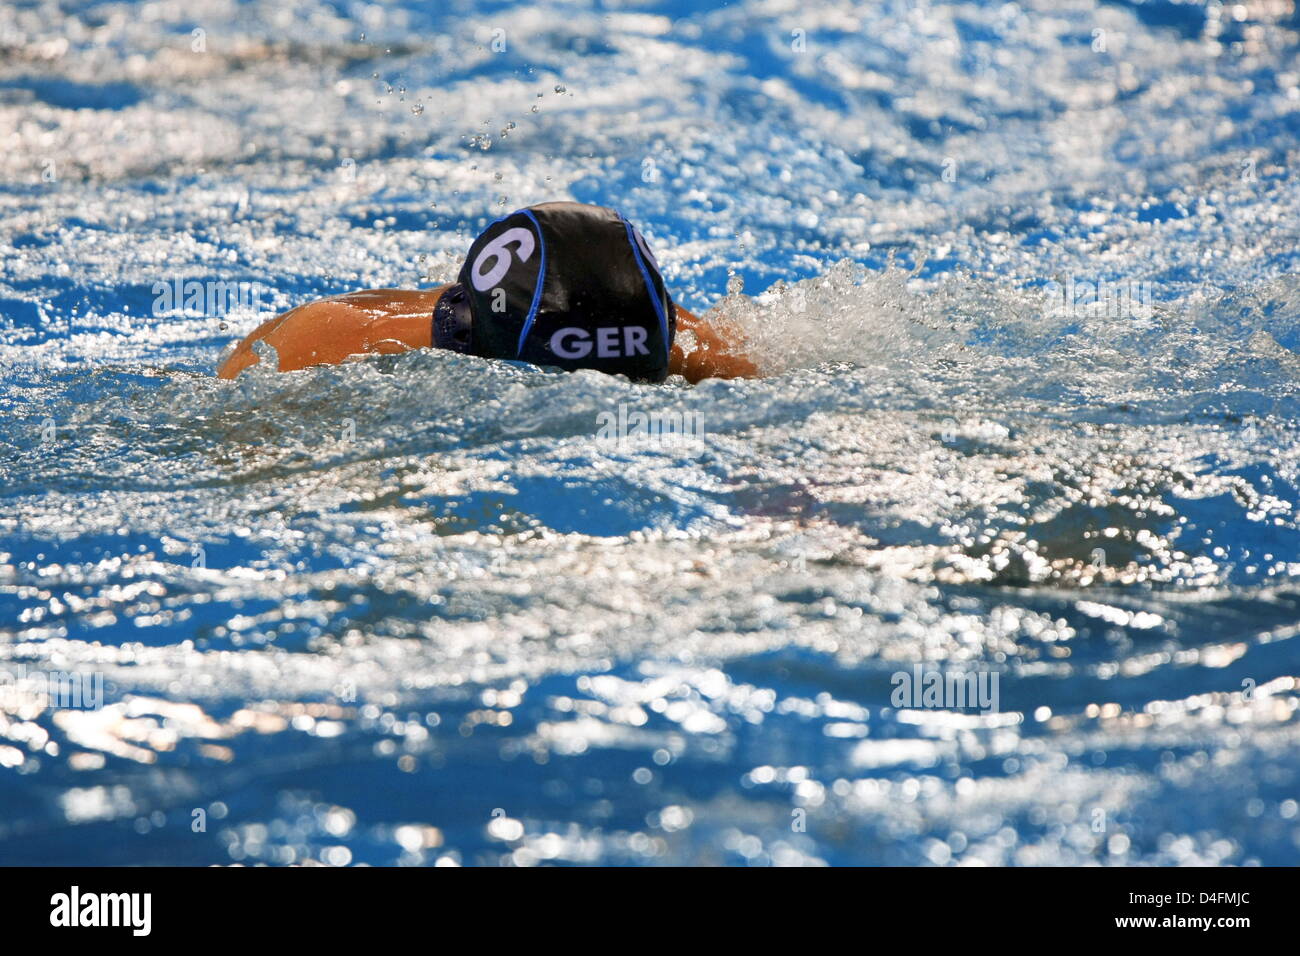 German Marc Politze competes during the preliminary round match in the men's water polo competition in the Yingdong Natatorium at the Beijing 2008 Olympic Games, Beijing, China, 14 August 2008. Photo: Jens Buettner dpa (c) dpa - Bildfunk Stock Photo